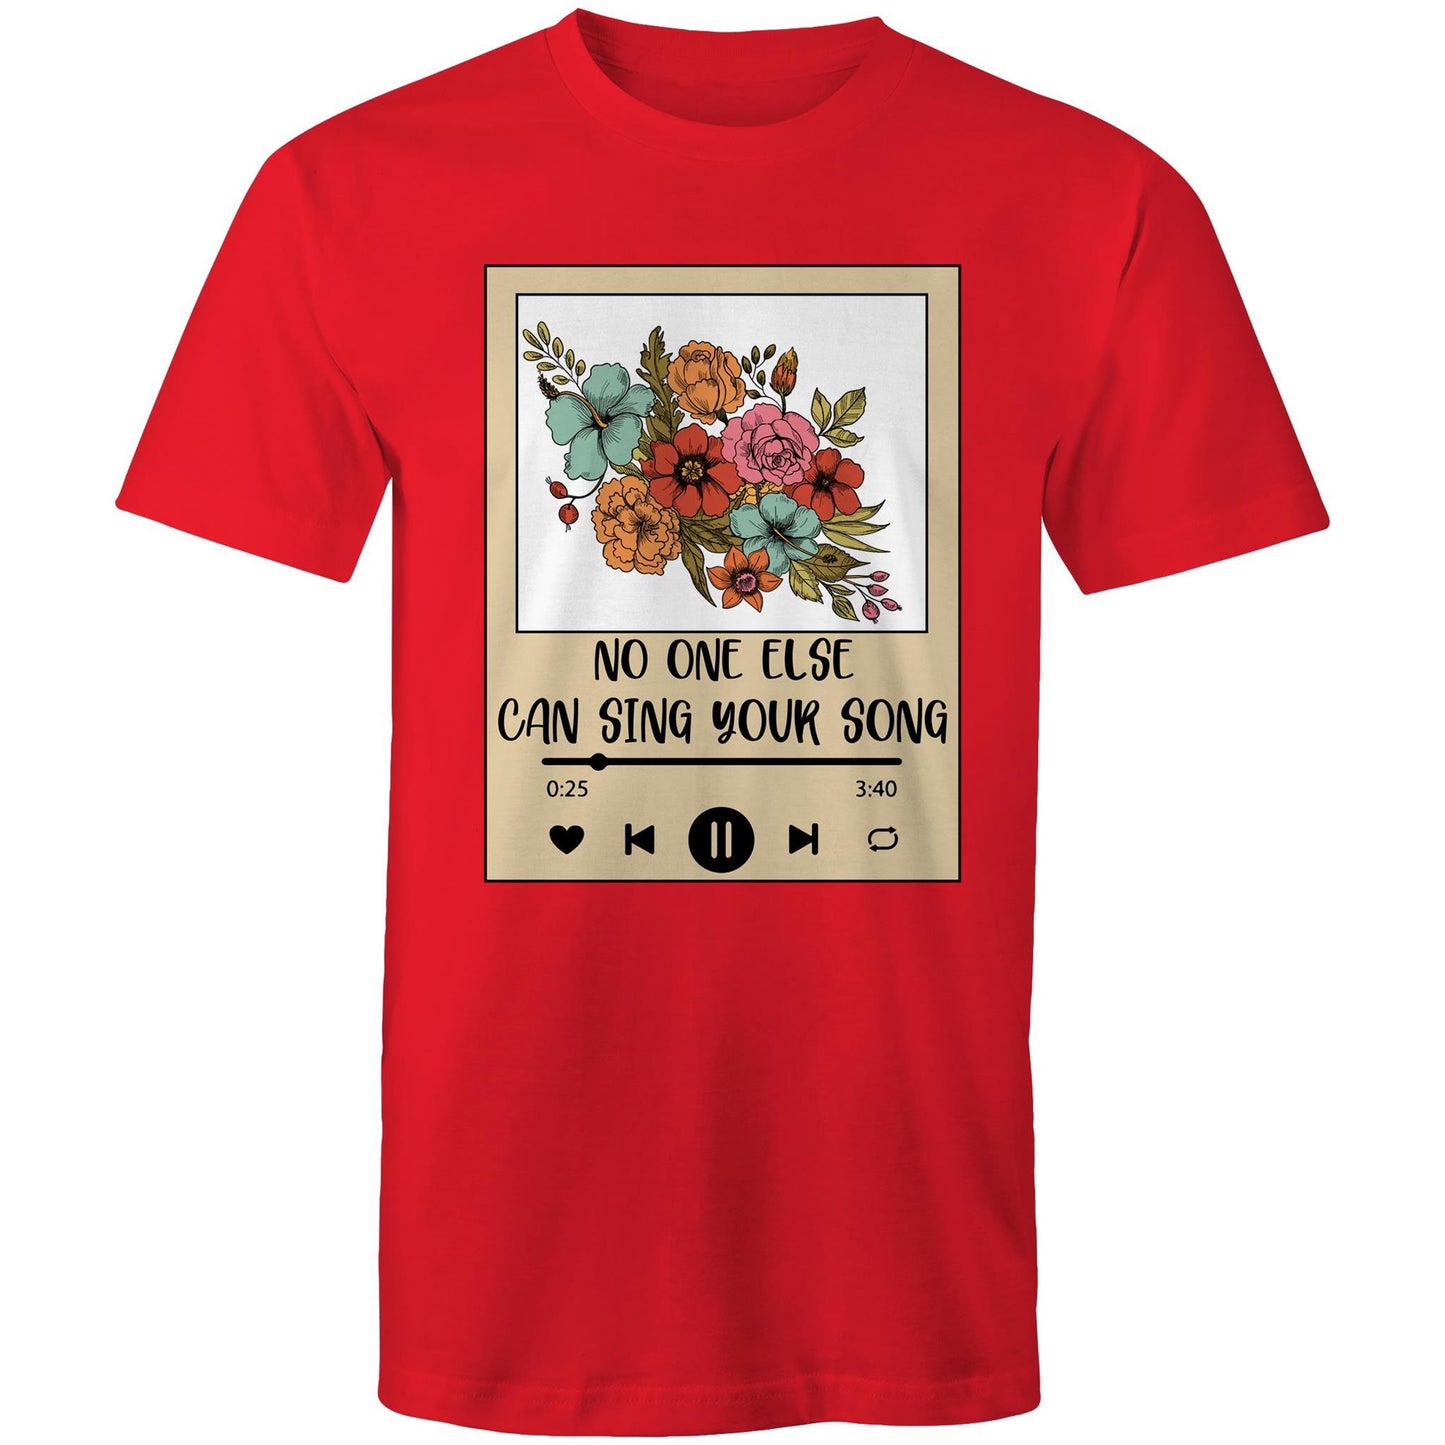 Mens T-Shirt - No one else can sing your song